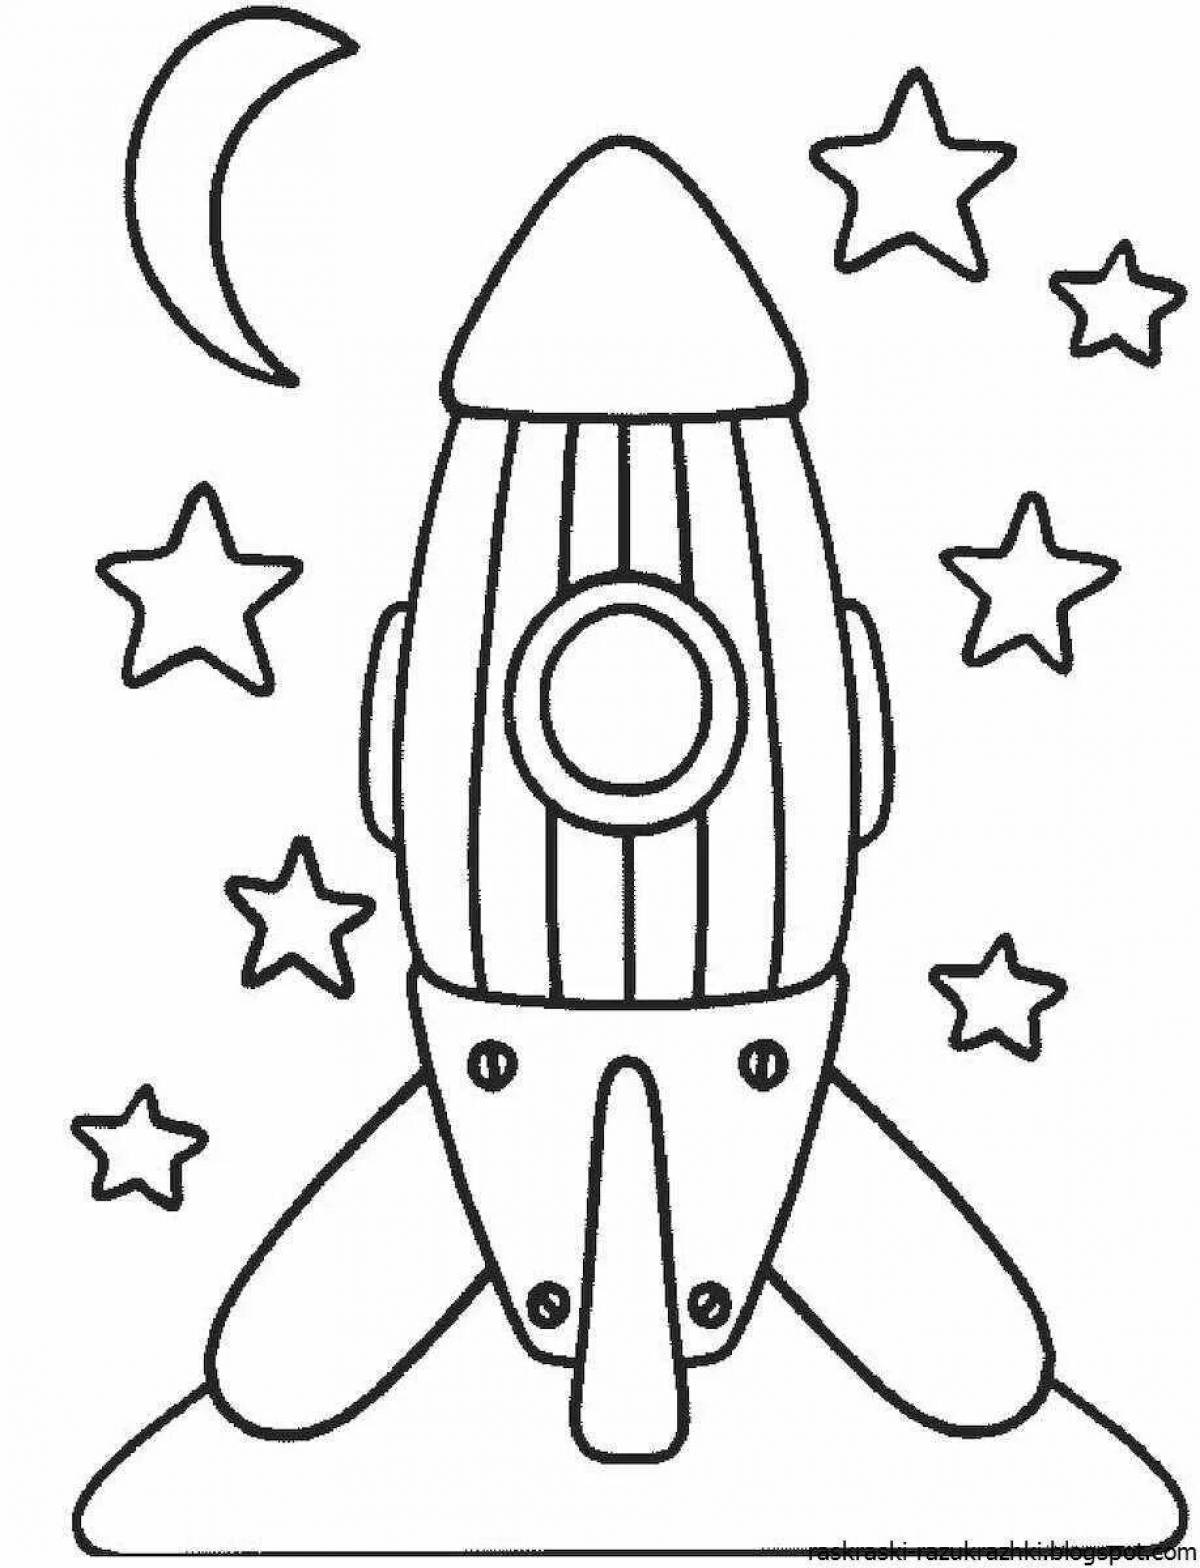 Shining rocket coloring book for kids